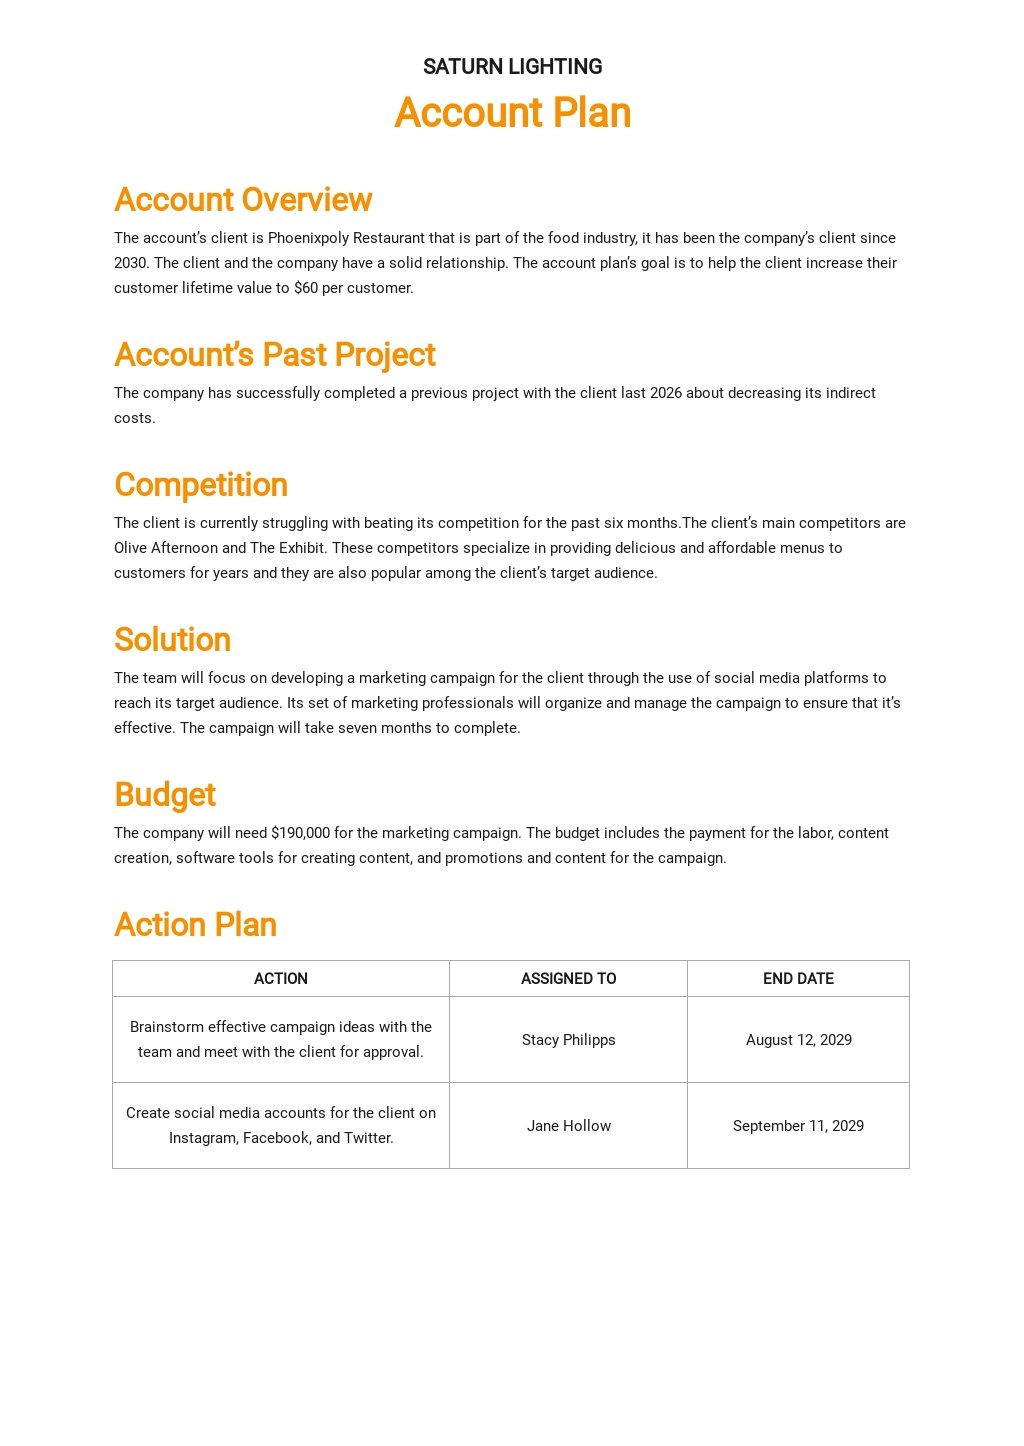 Account Plan Format Template [Free PDF] Word